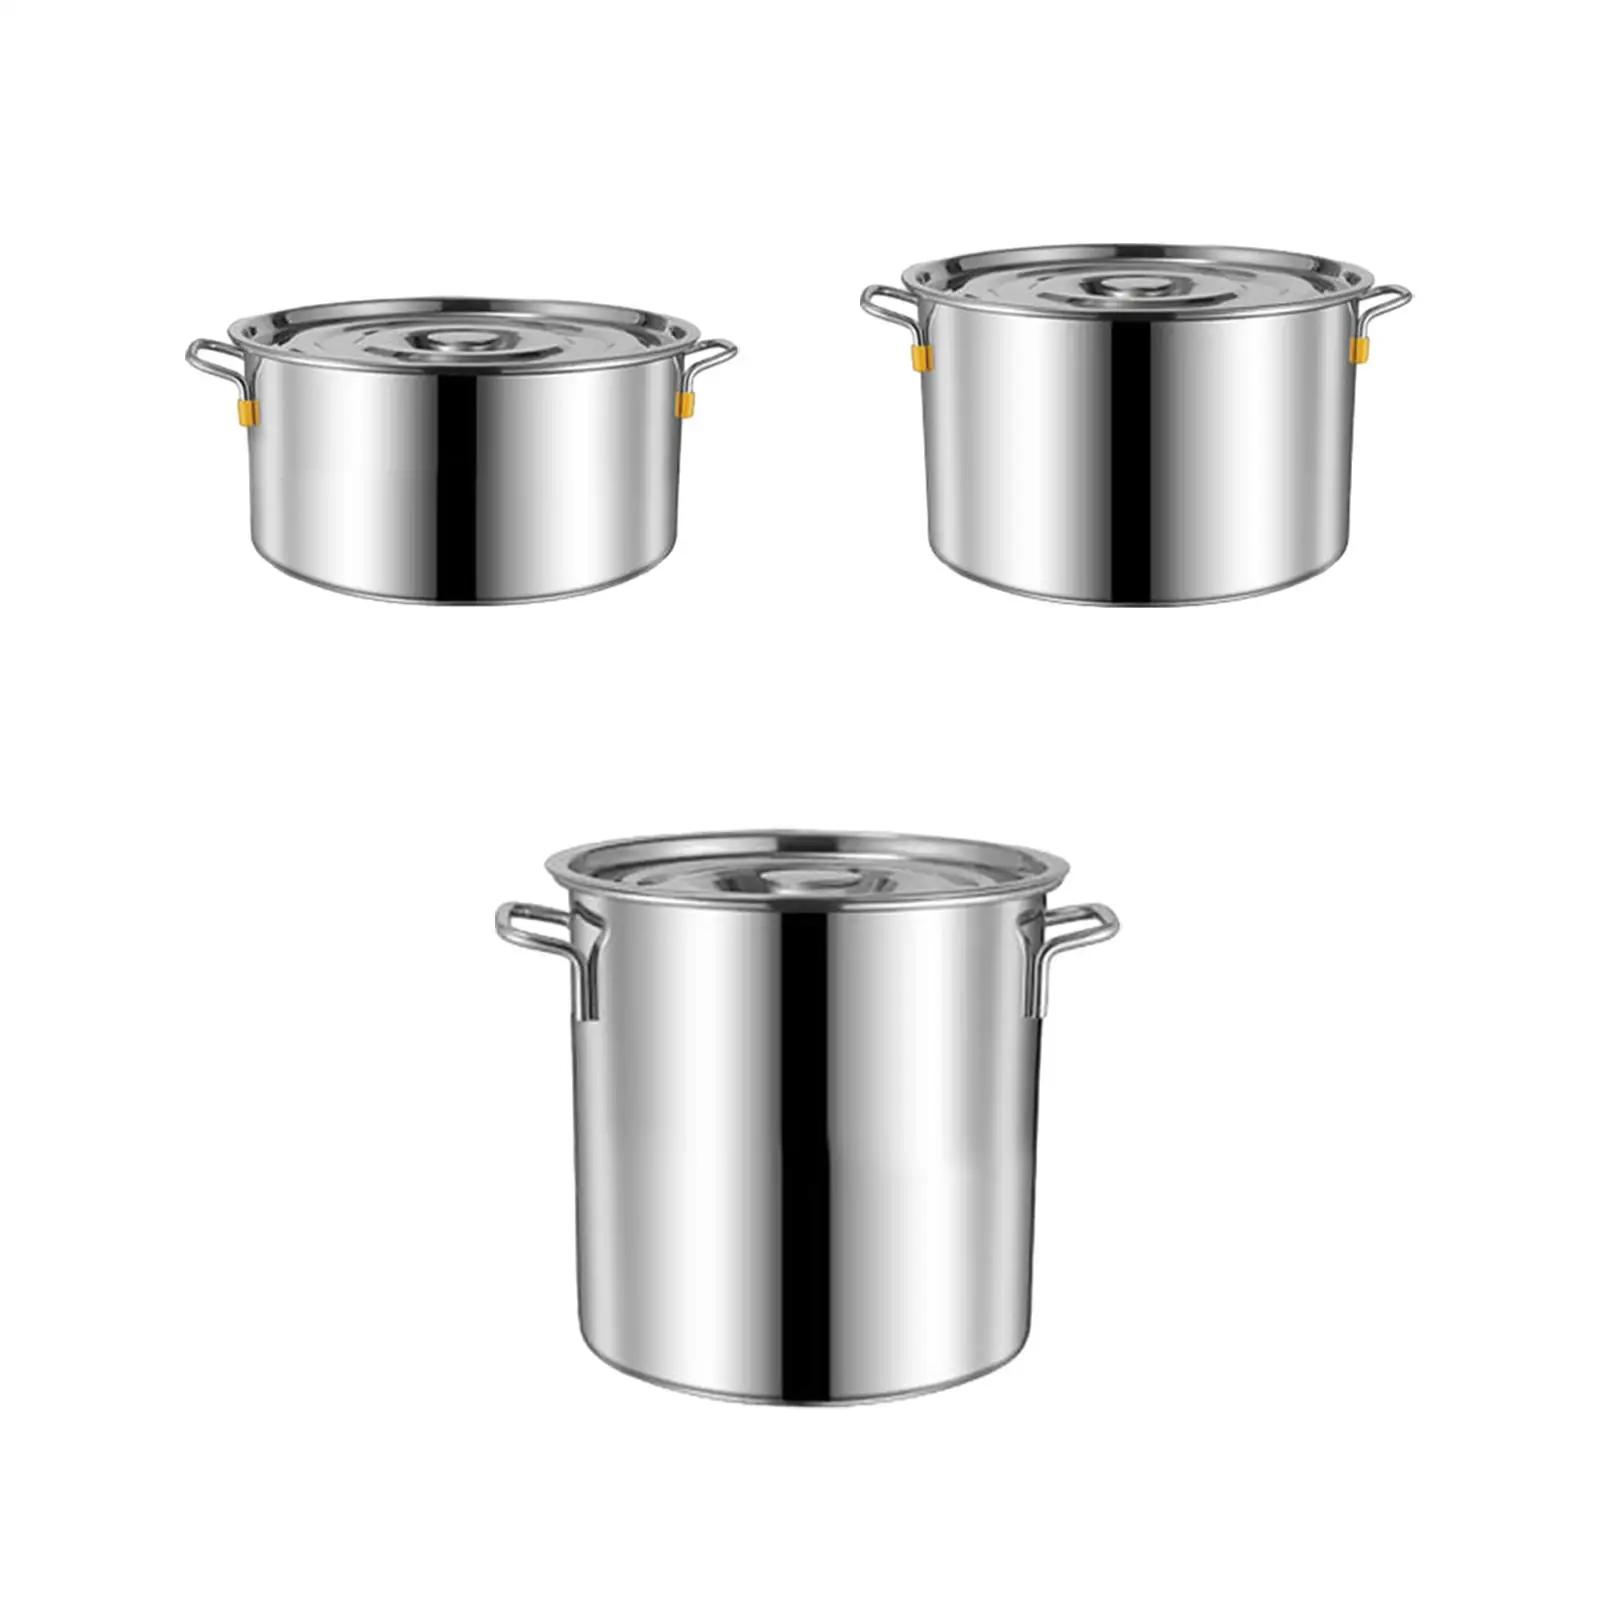 Cater Stew Soup Boiling Pan Double Handle Suitable for All Stoves Multipurpose